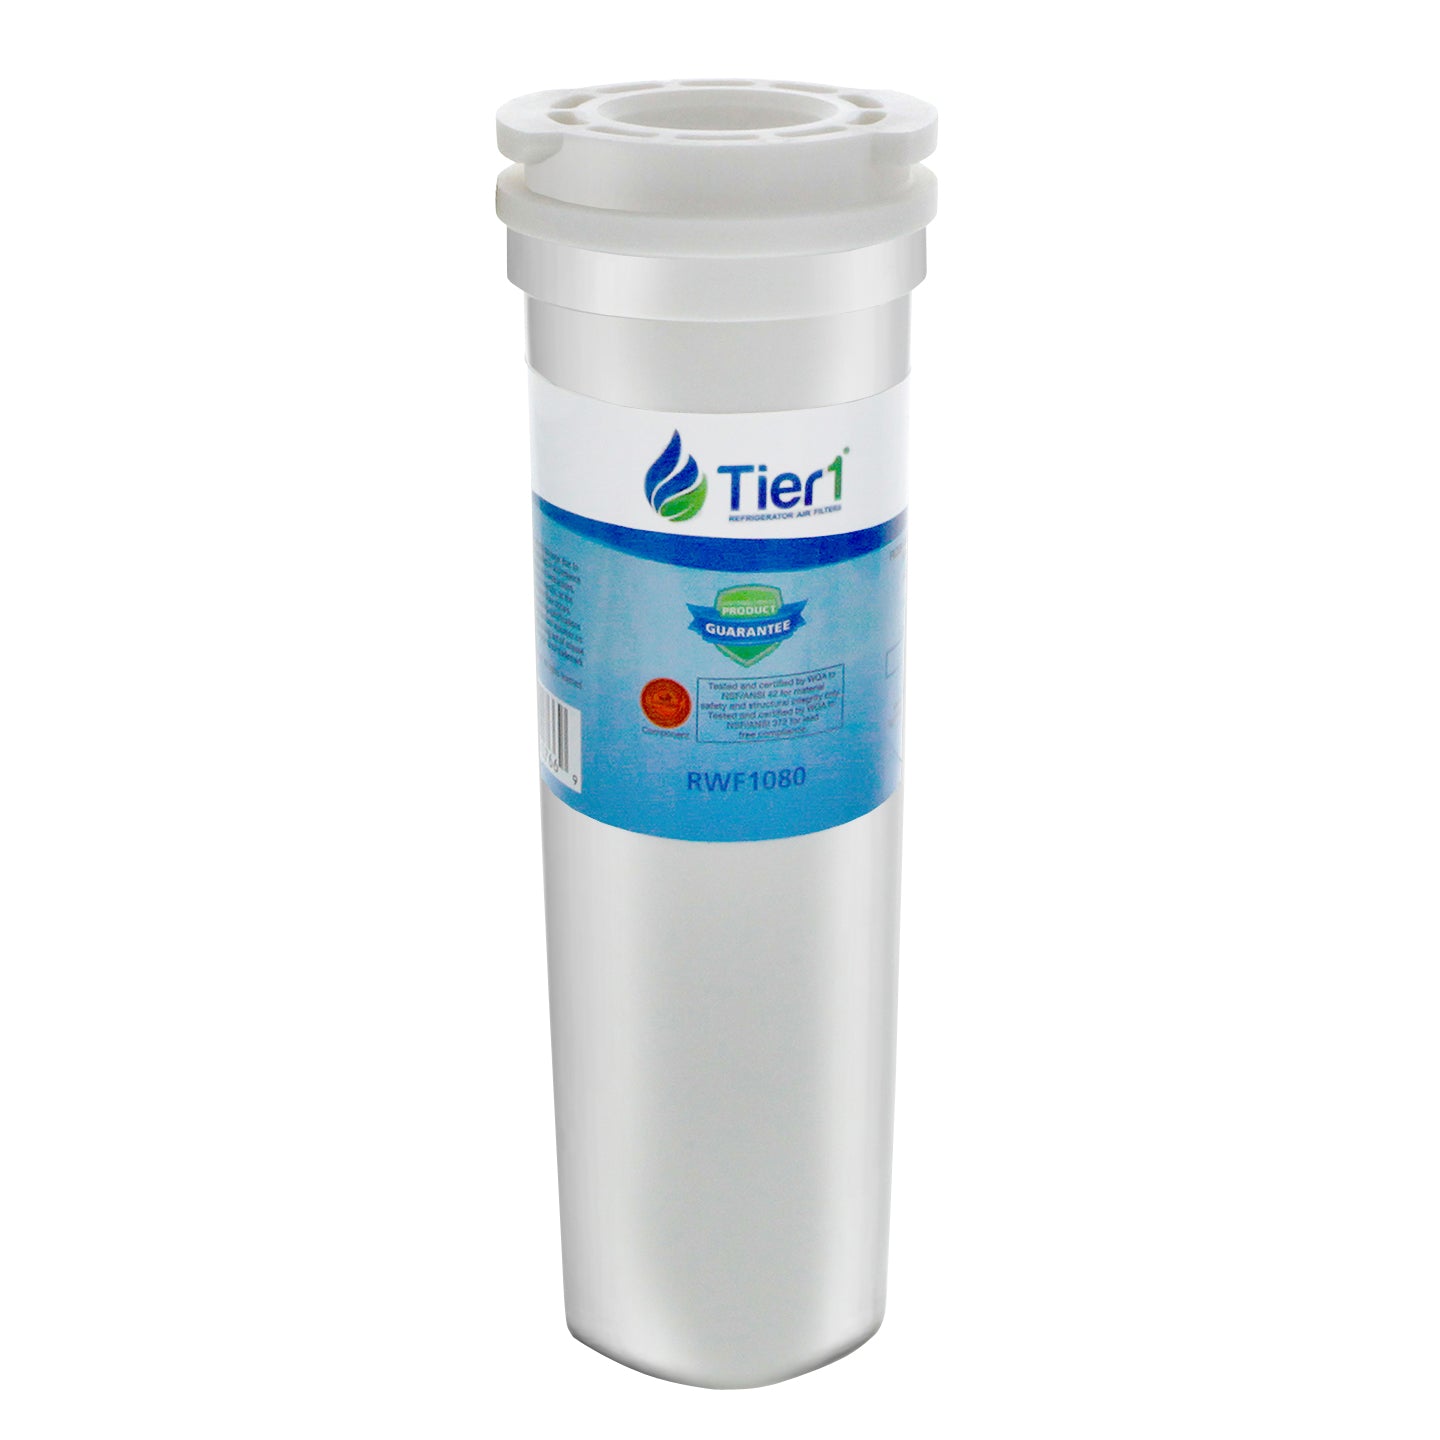 Tier1 Fisher & Paykel 836848 Refrigerator Water Filter Replacement Comparable